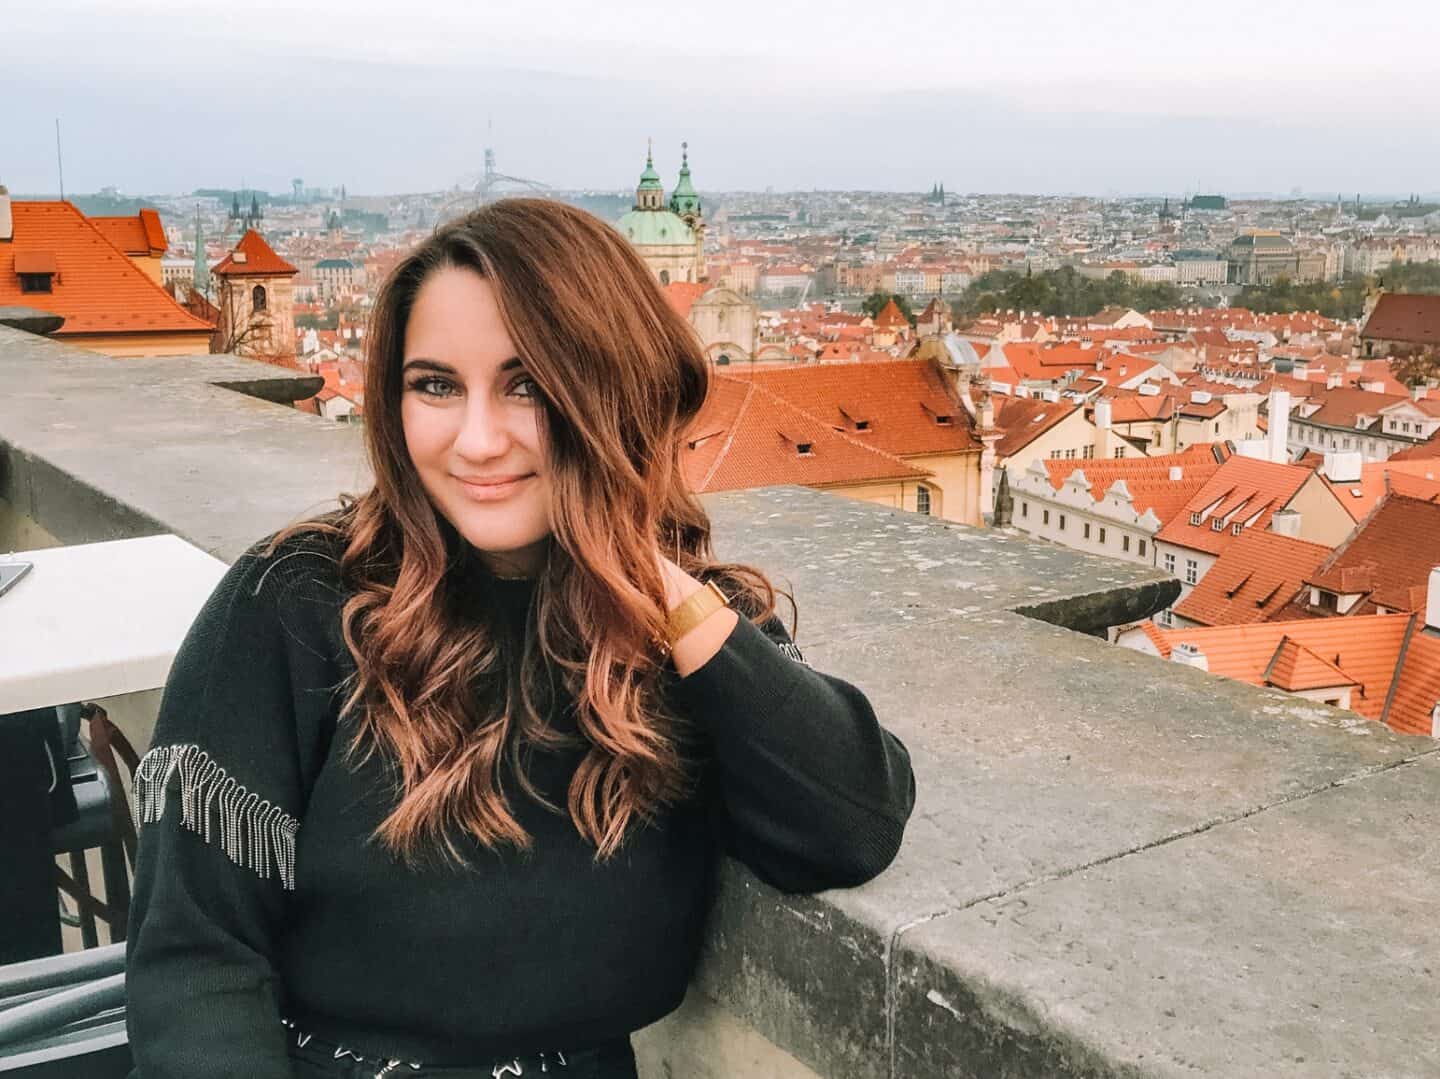 Taking in the views at the Starbucks Viewpoint during my 4 days in Prague itinerary.